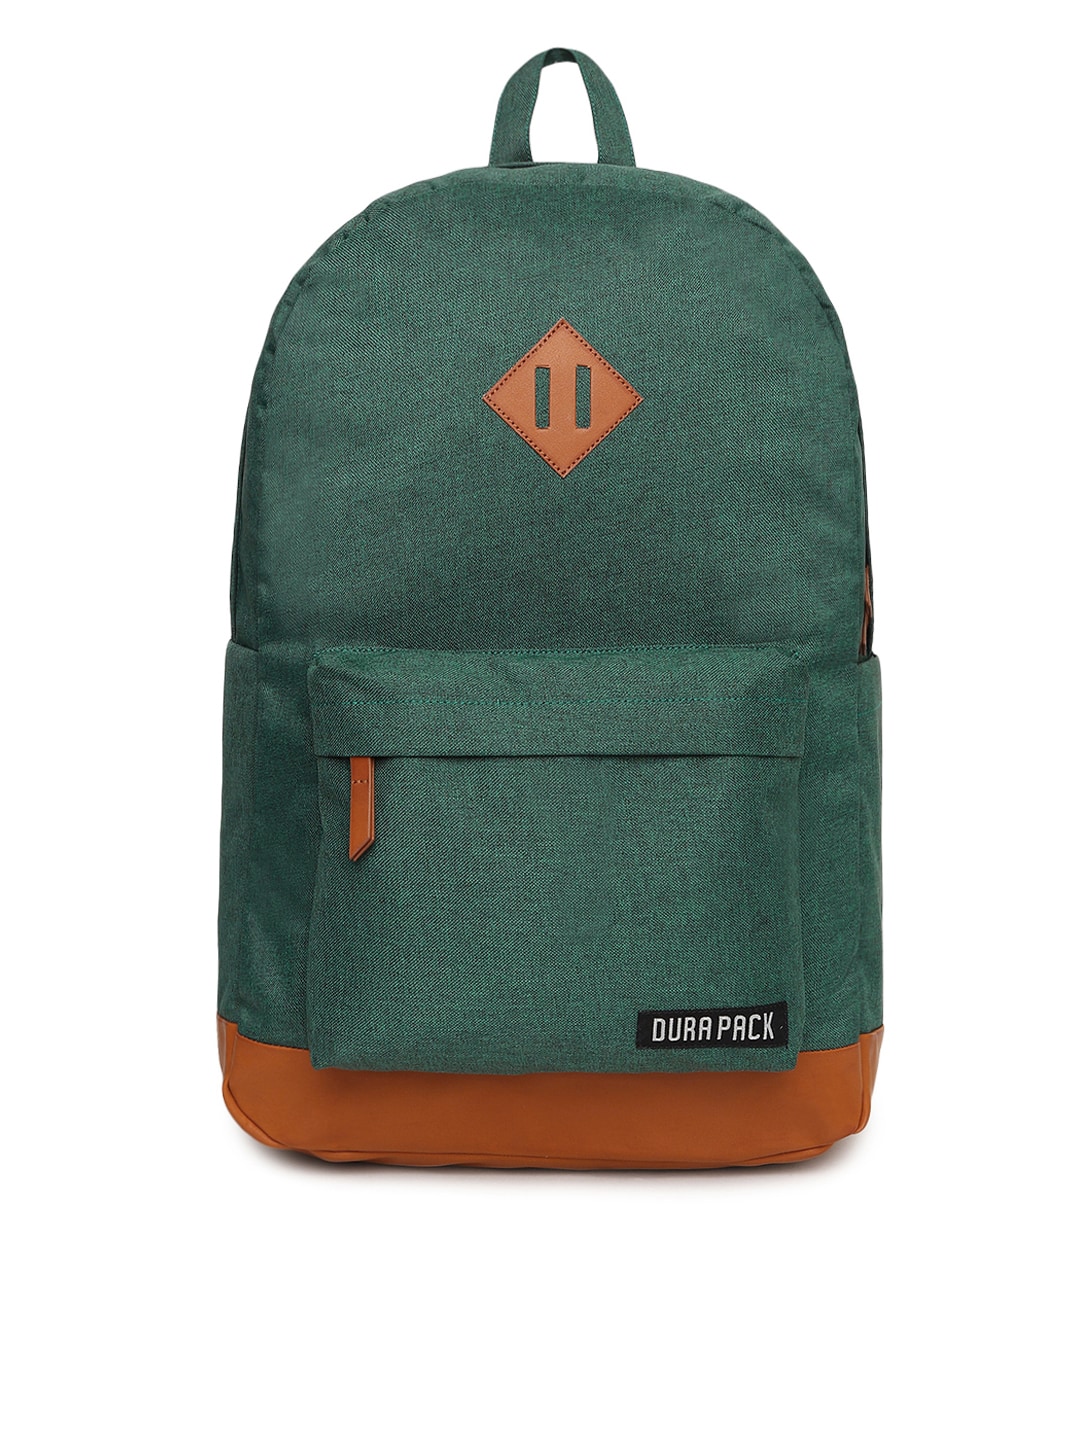 Durapack Unisex Green Solid Laptop Backpack Price in India